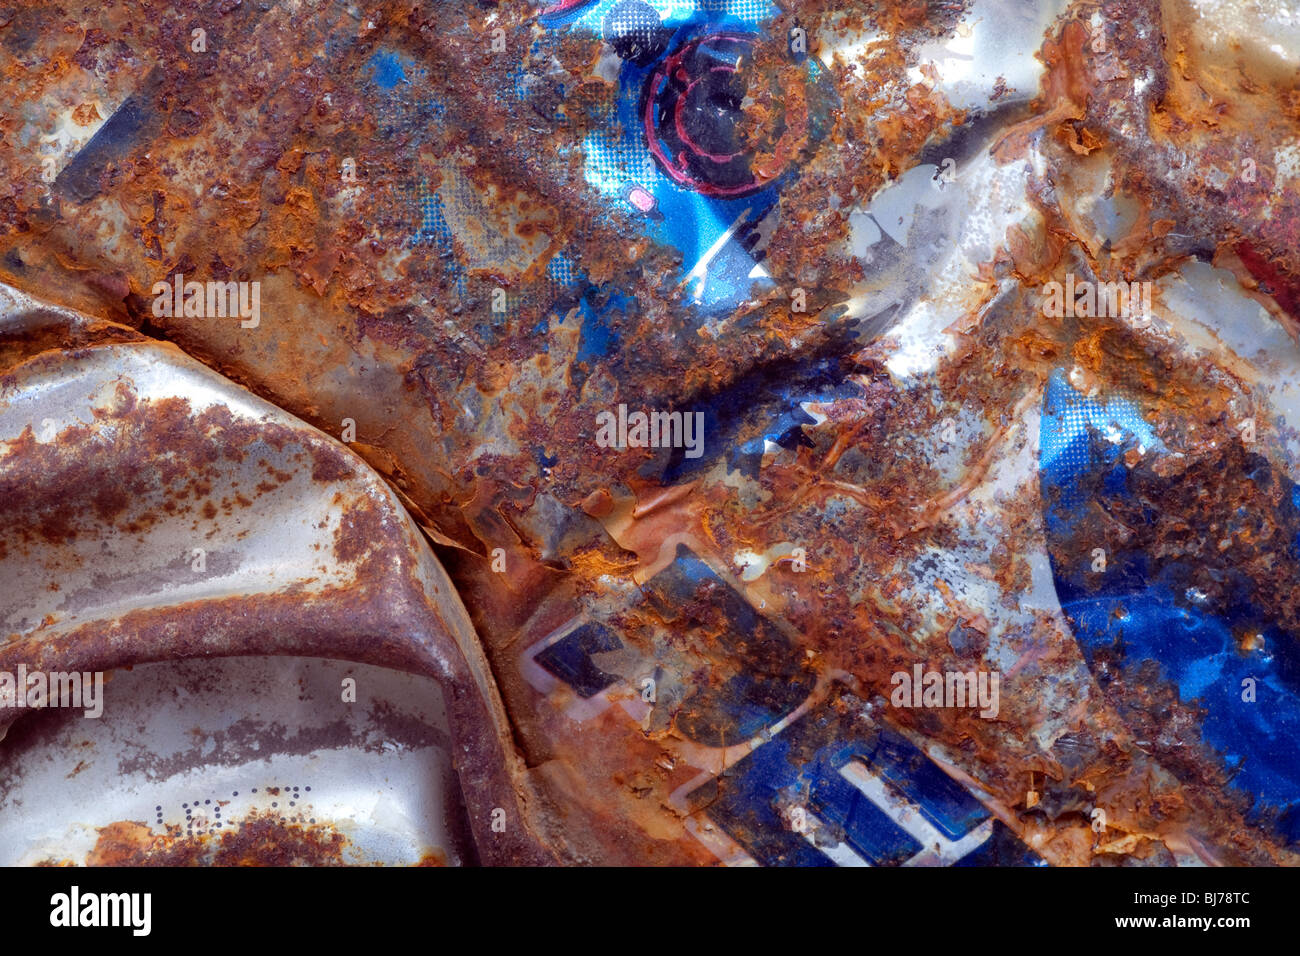 Detailed image showing the texture/colour of a discarded/compressed soft drinks can that has been found littering a city street. Stock Photo